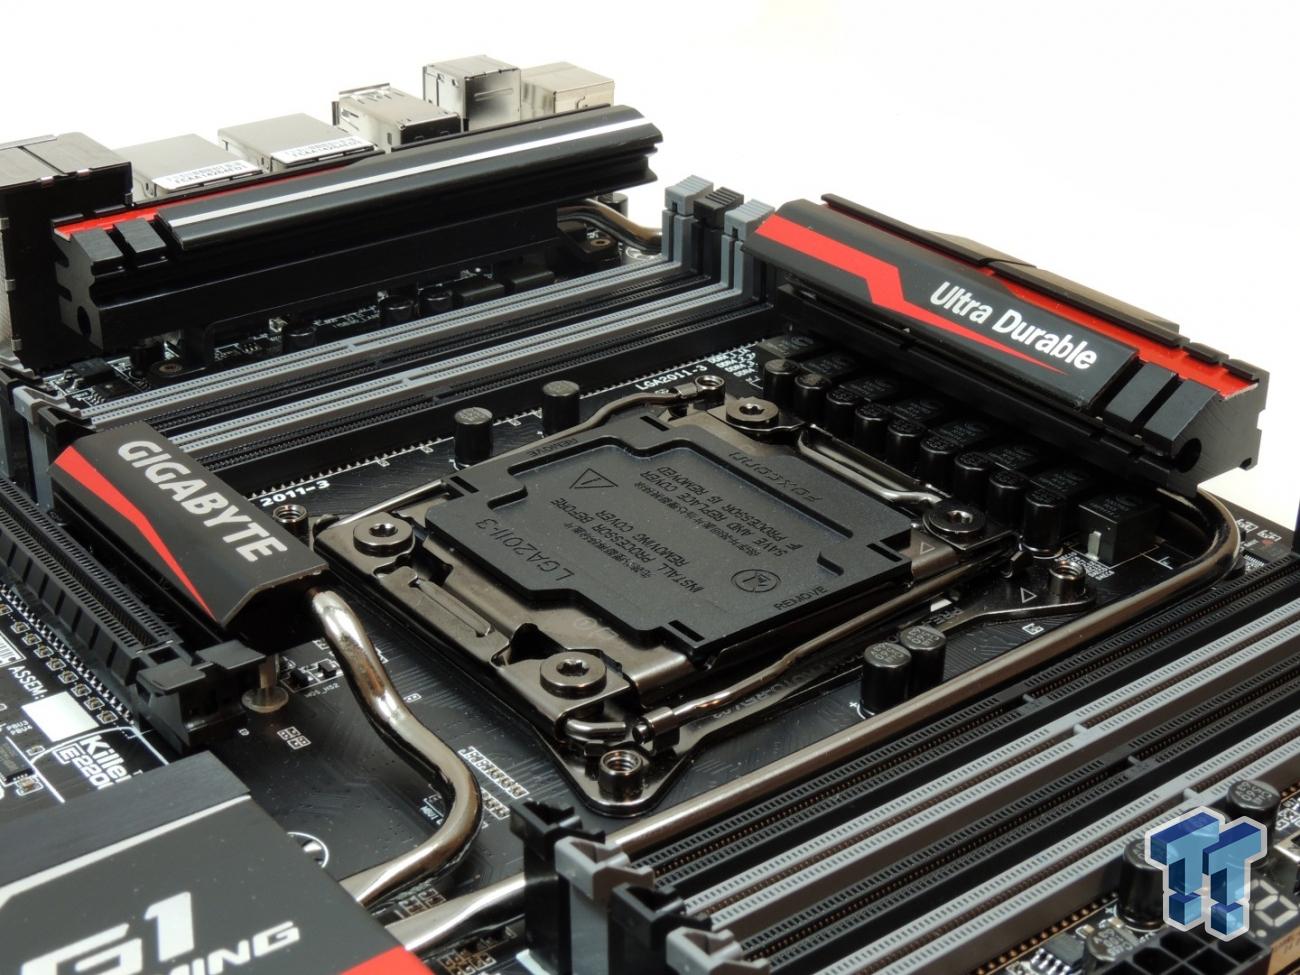 GIGABYTE X99-Gaming G1 Motherboard Overview and Overclocking Guide